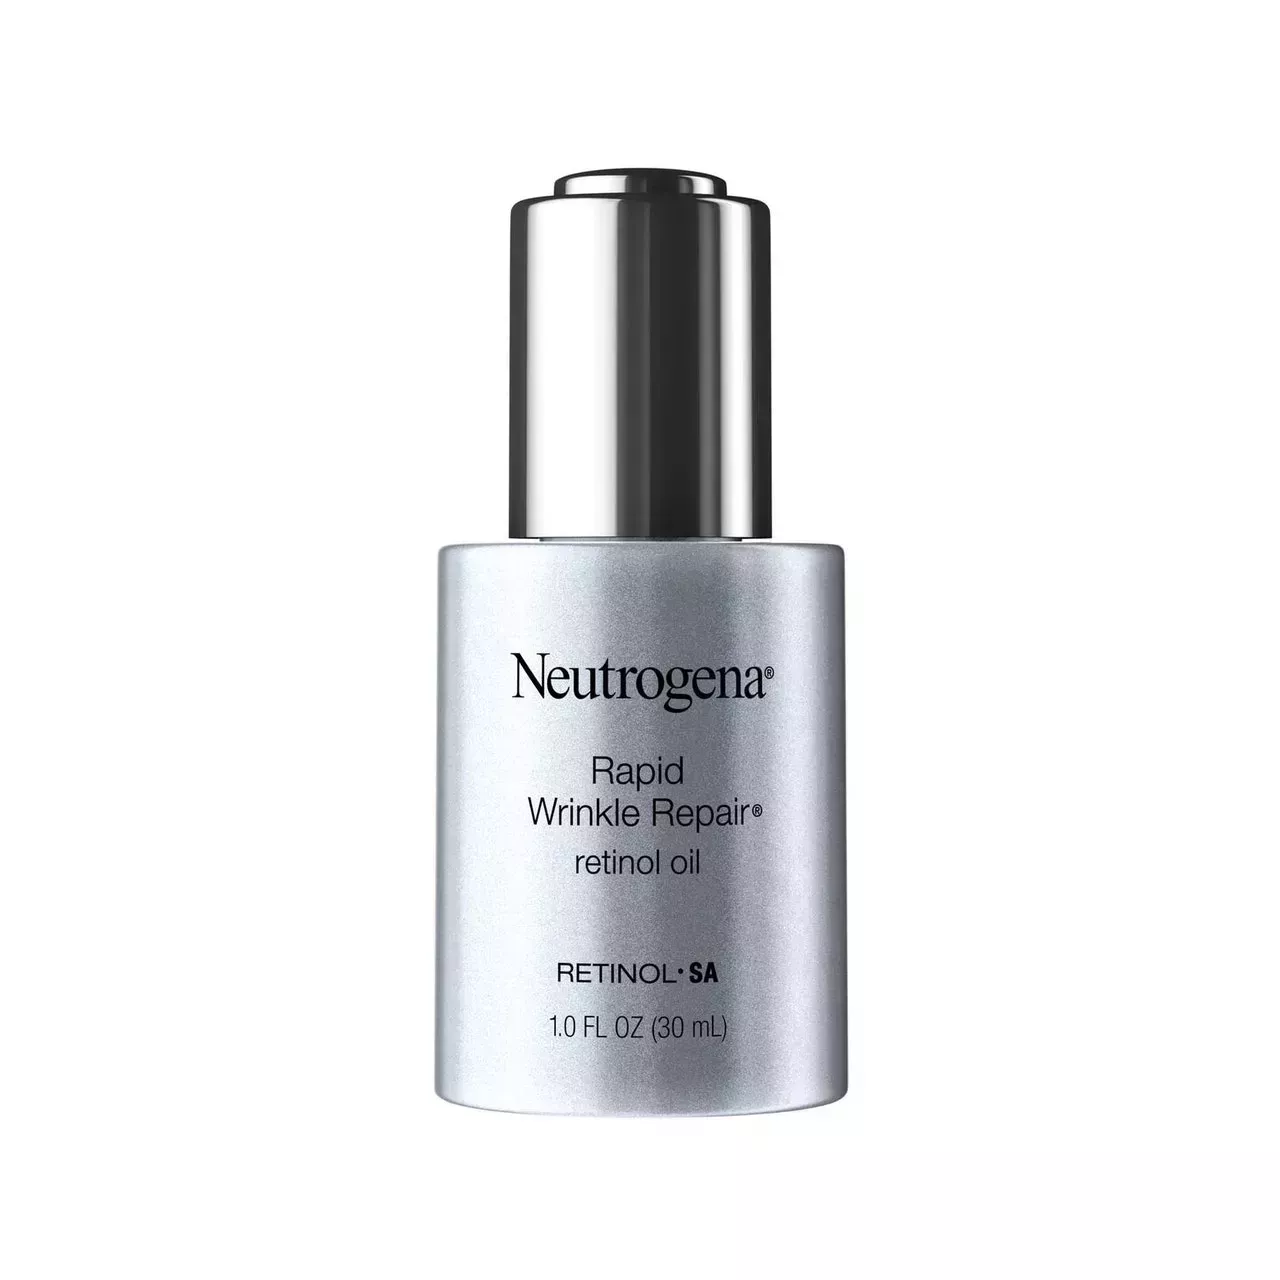 Best New Skin Care Launches of January 2019: Neutrogena Rapid Wrinkle Repair Oil